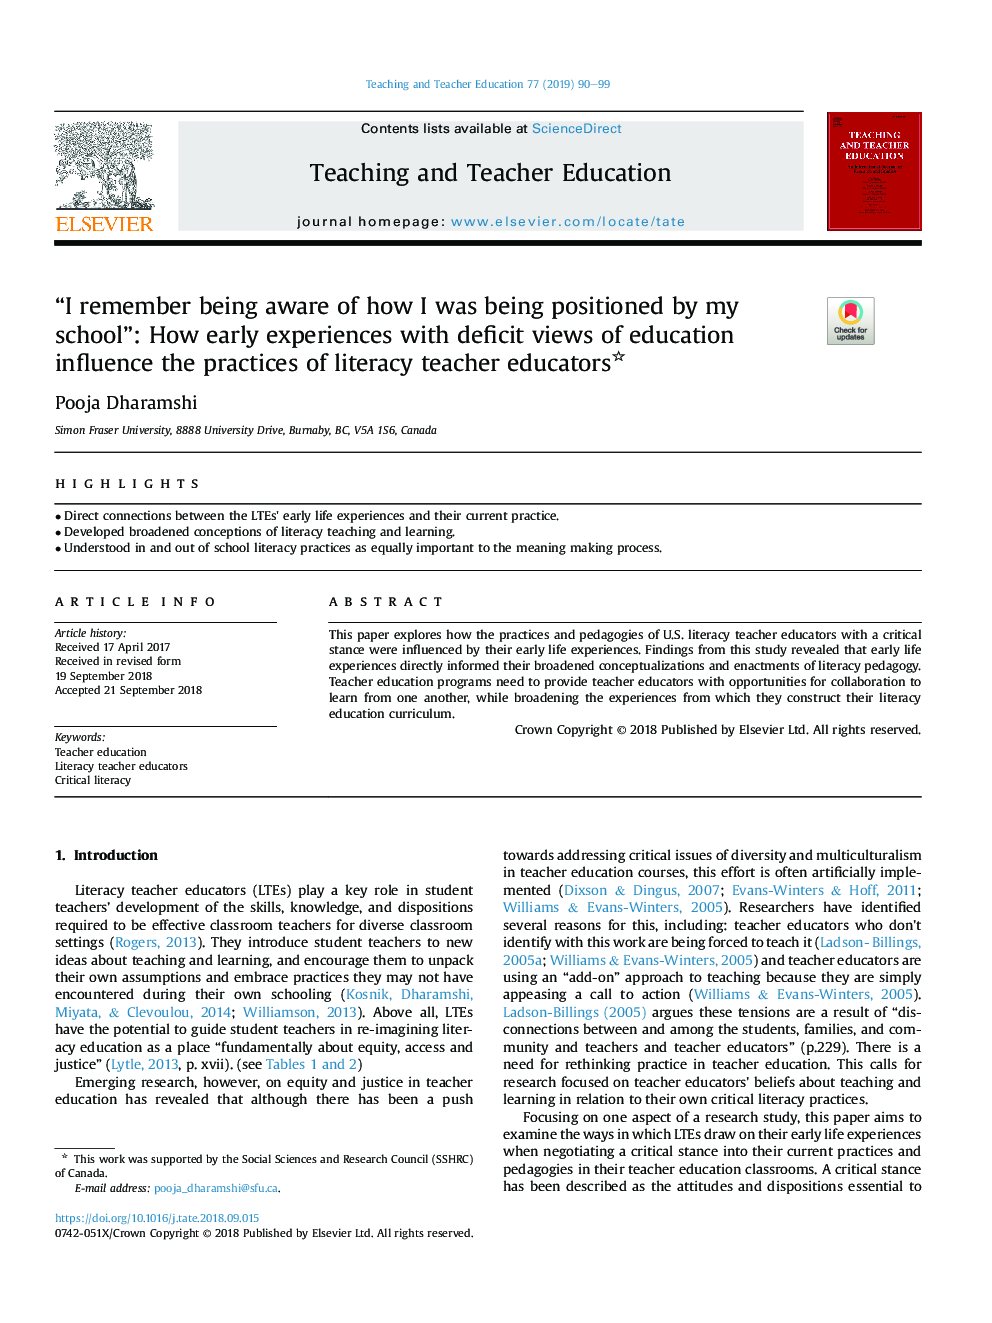 “I remember being aware of how I was being positioned by my school”: How early experiences with deficit views of education influence the practices of literacy teacher educators